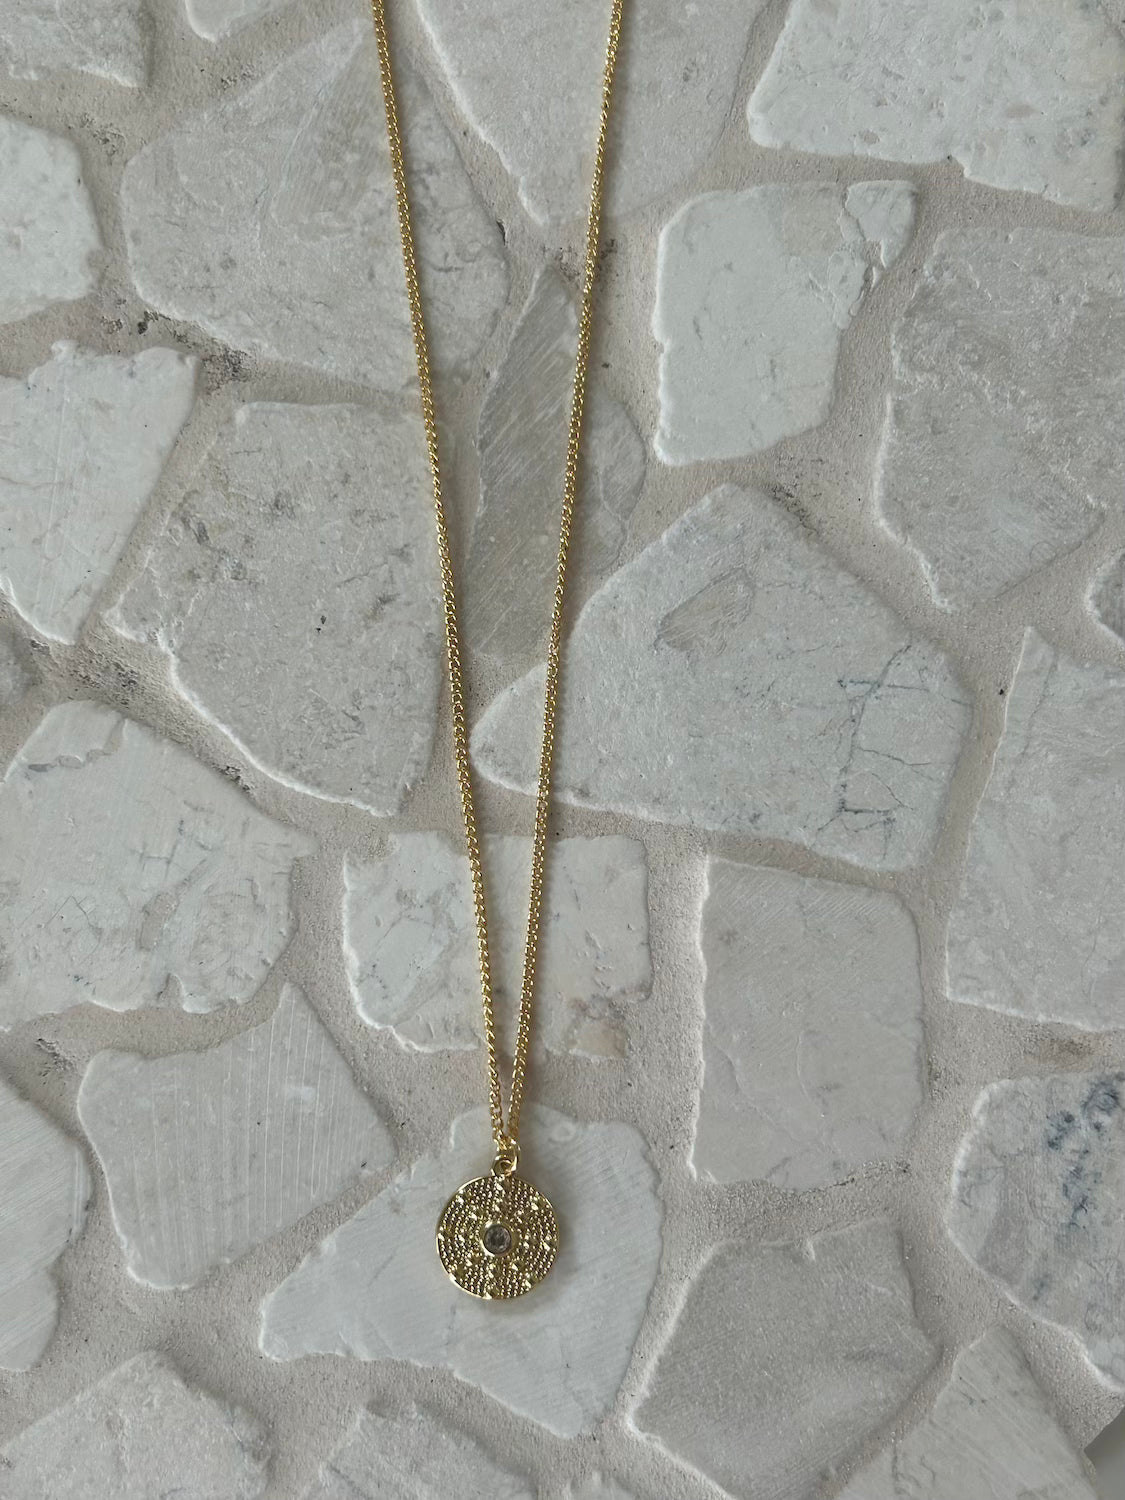 Inner- Light long chain necklace - 18k Gold Plated jewellery